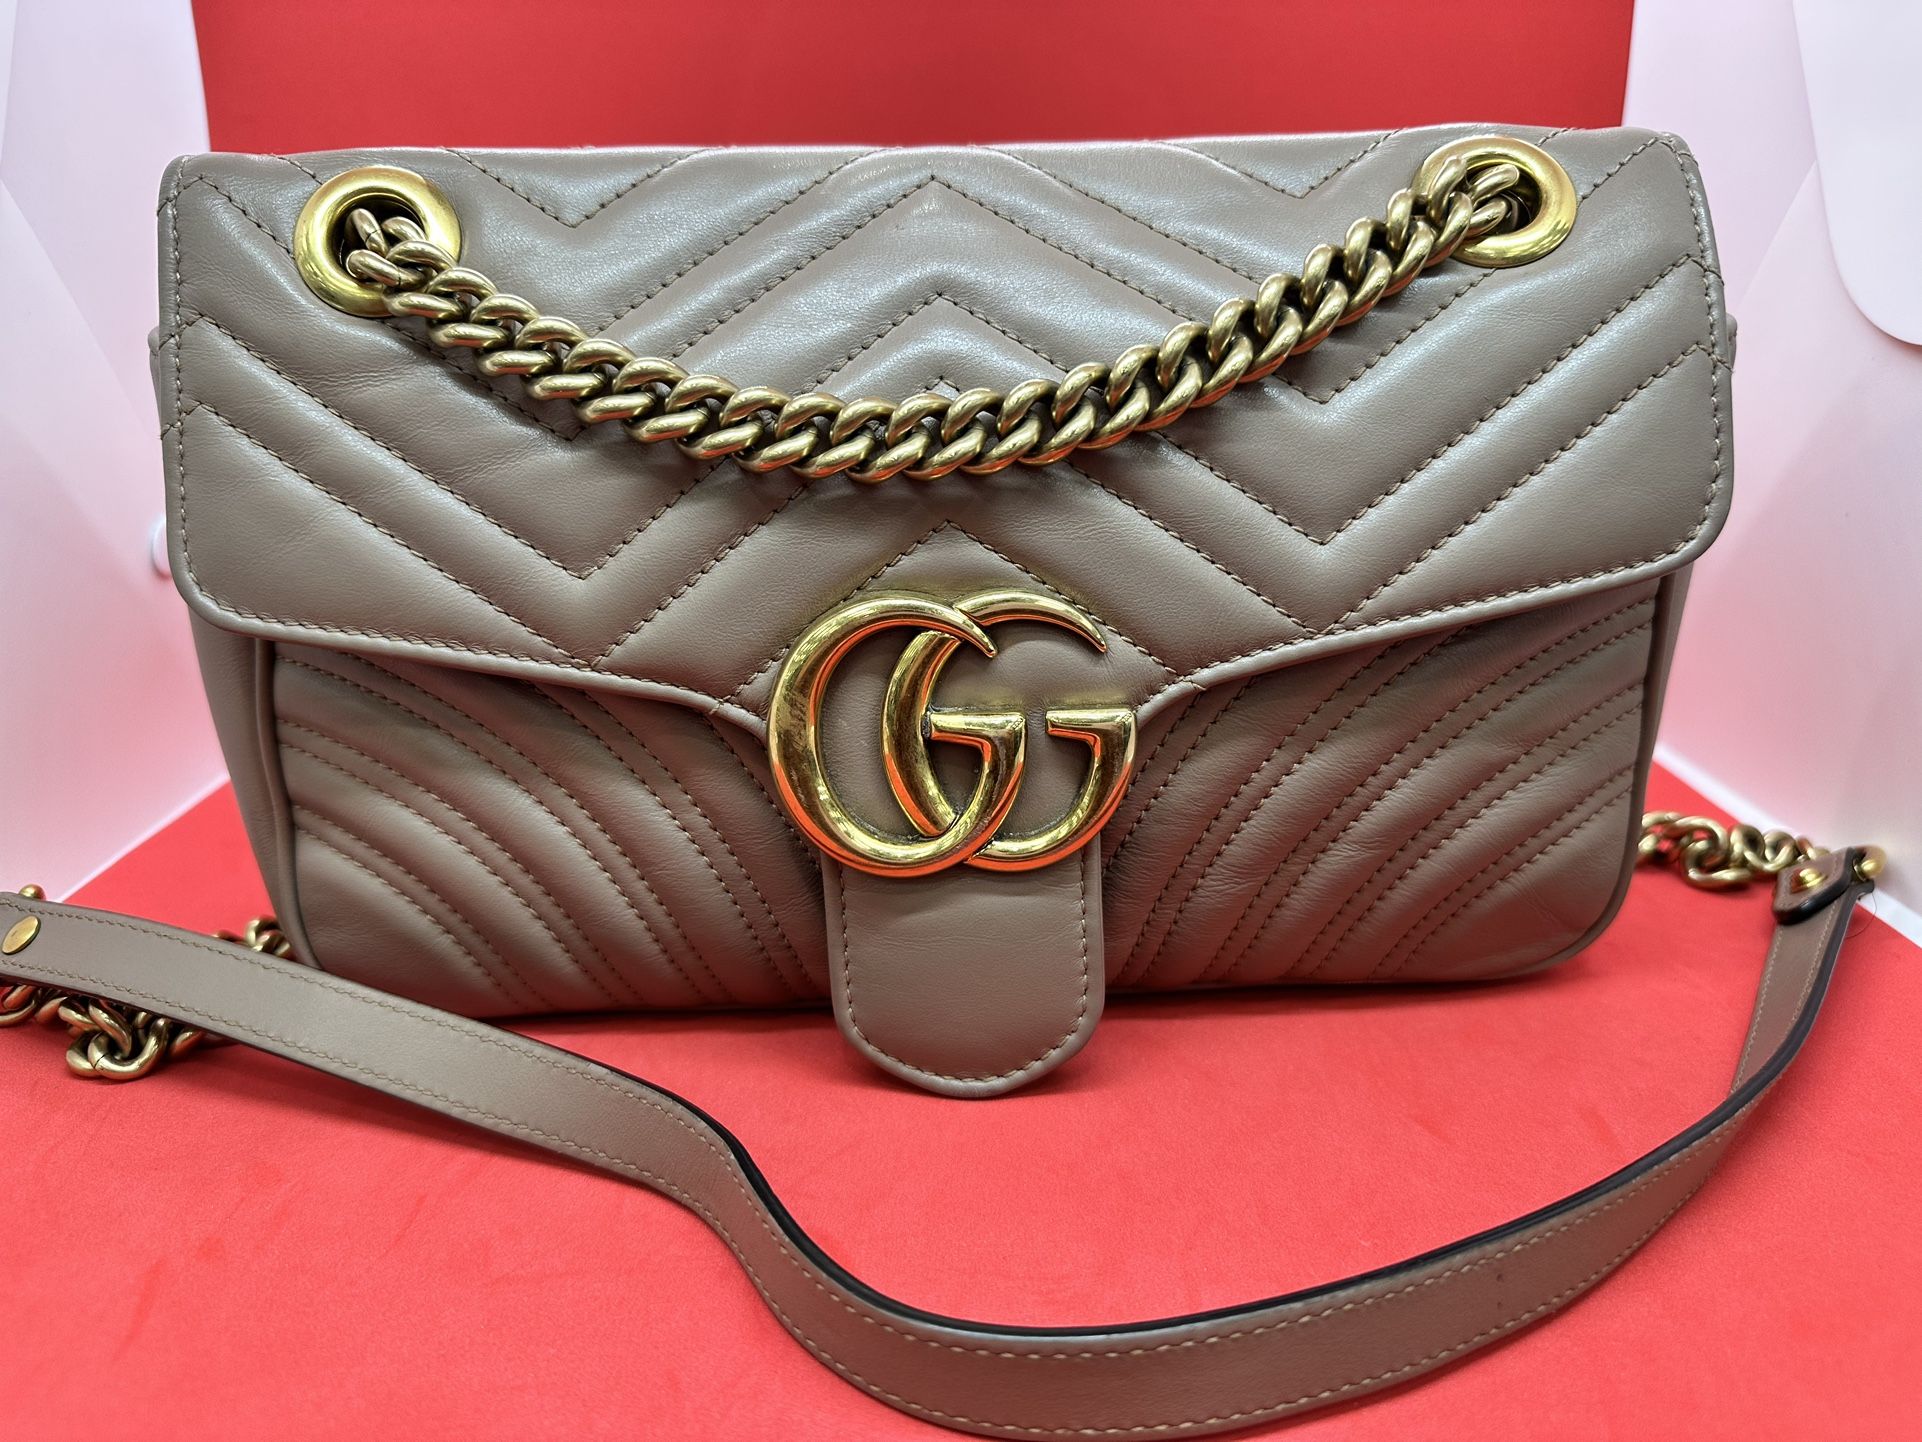 Gucci - Authenticated Handbag - Leather Brown for Women, Very Good Condition